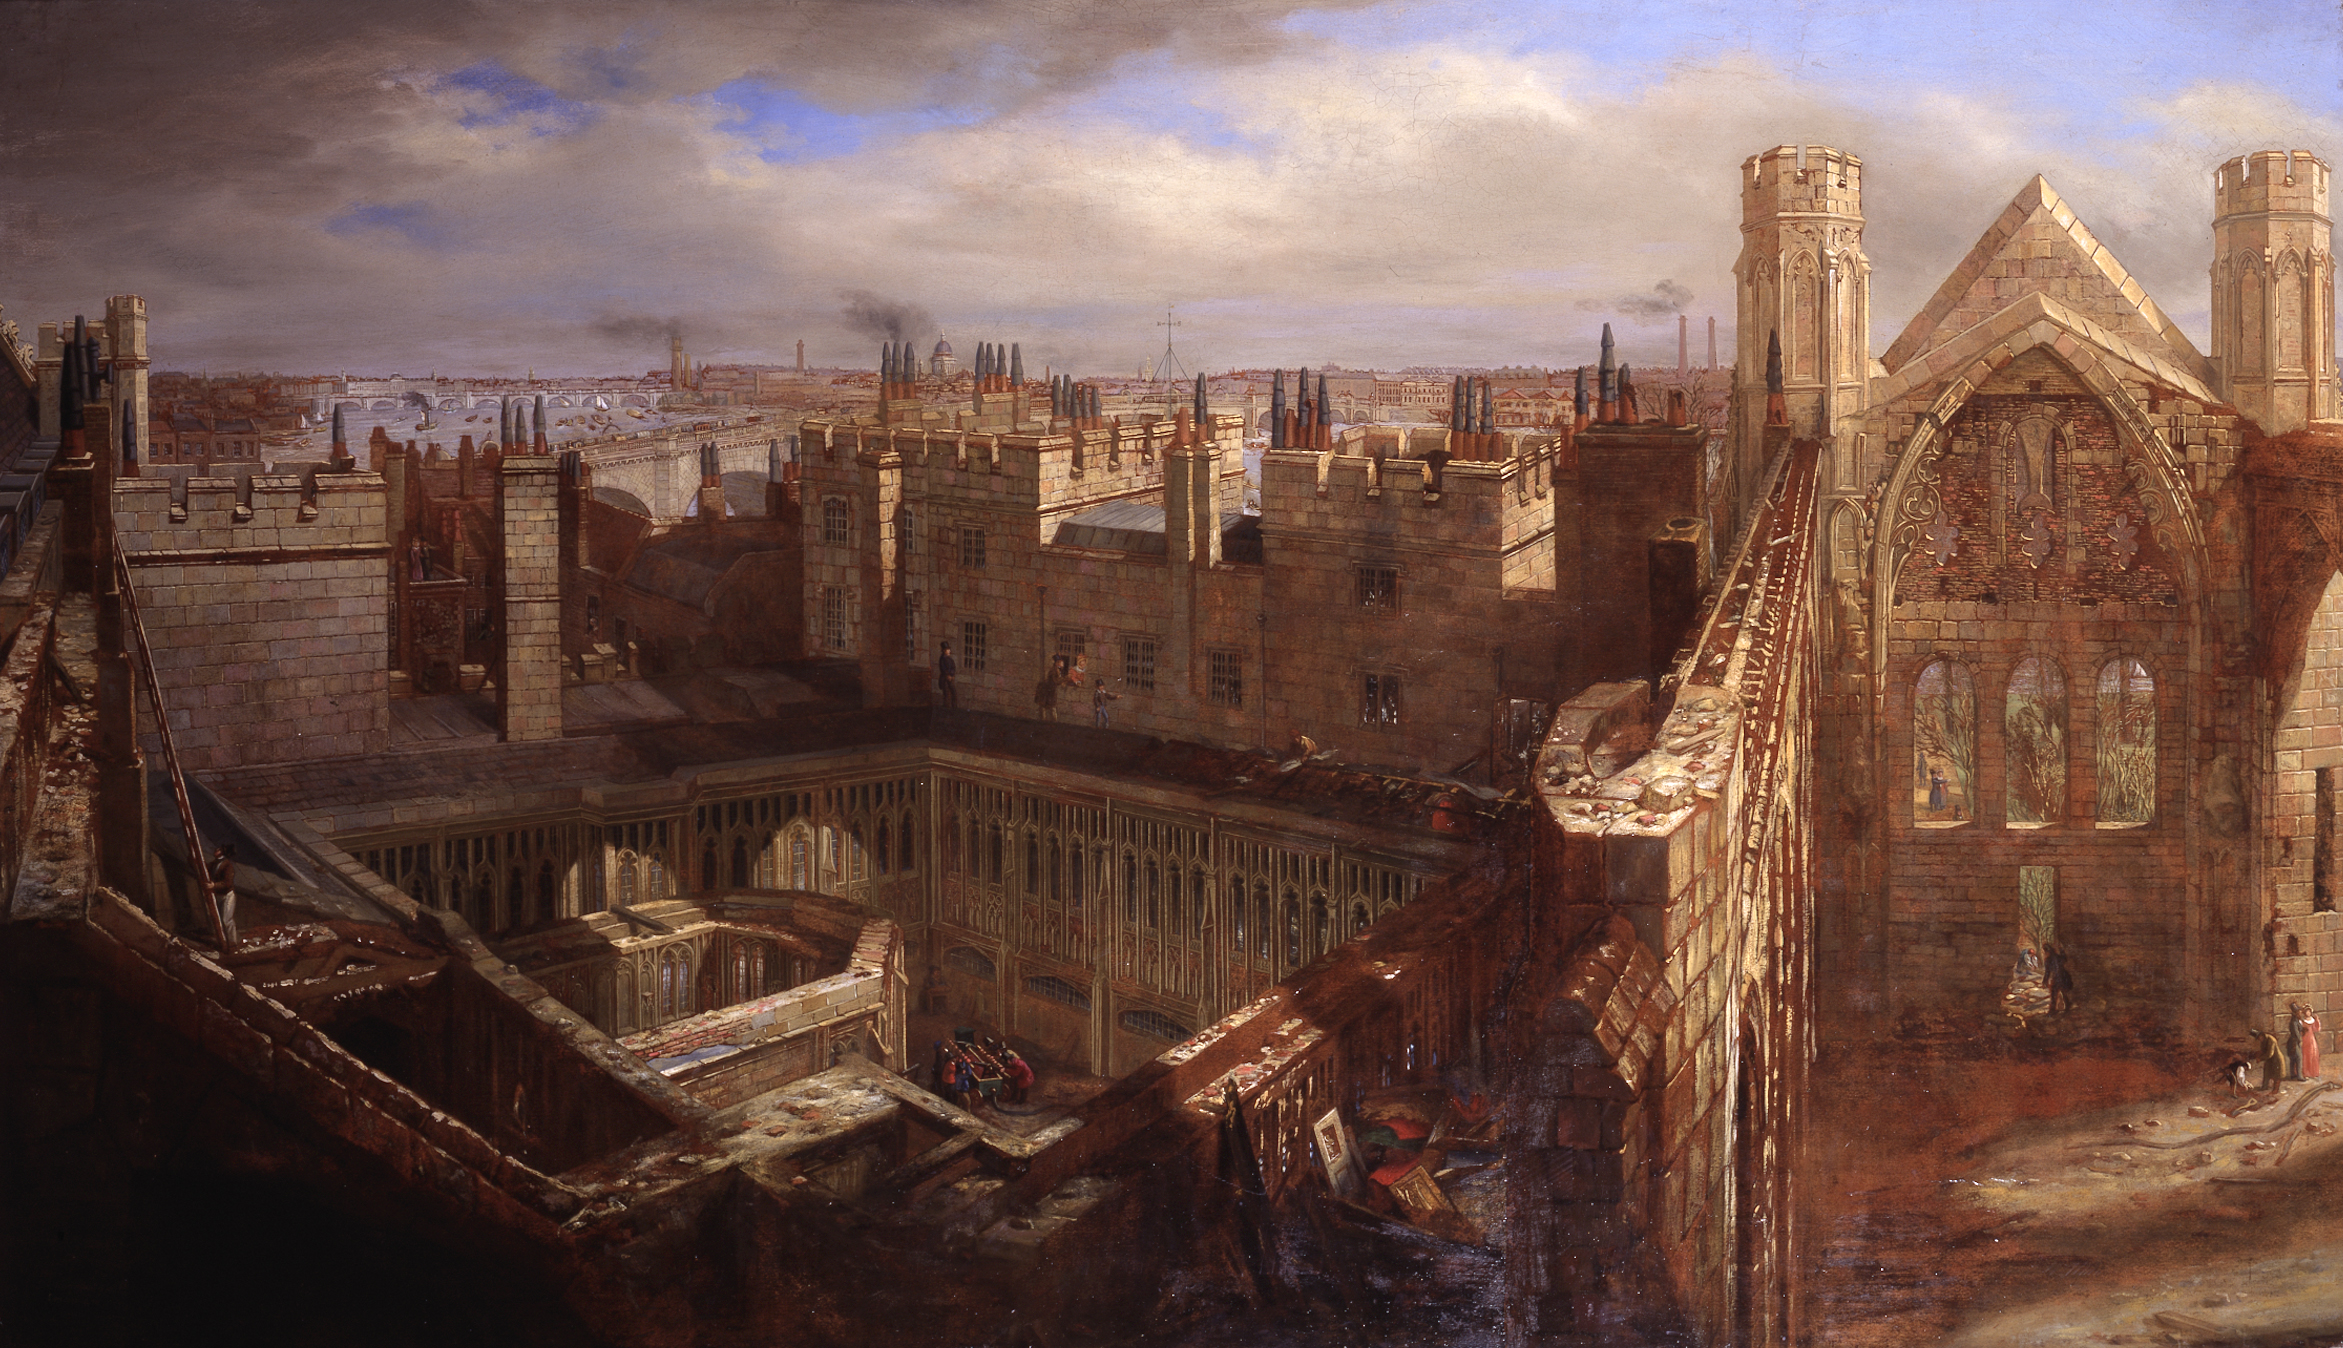 Panorama of the Ruins of the Old Palace of Westminster, 1834, Painting, by George Scharf © Parliamentary Art Collection WOA 3793